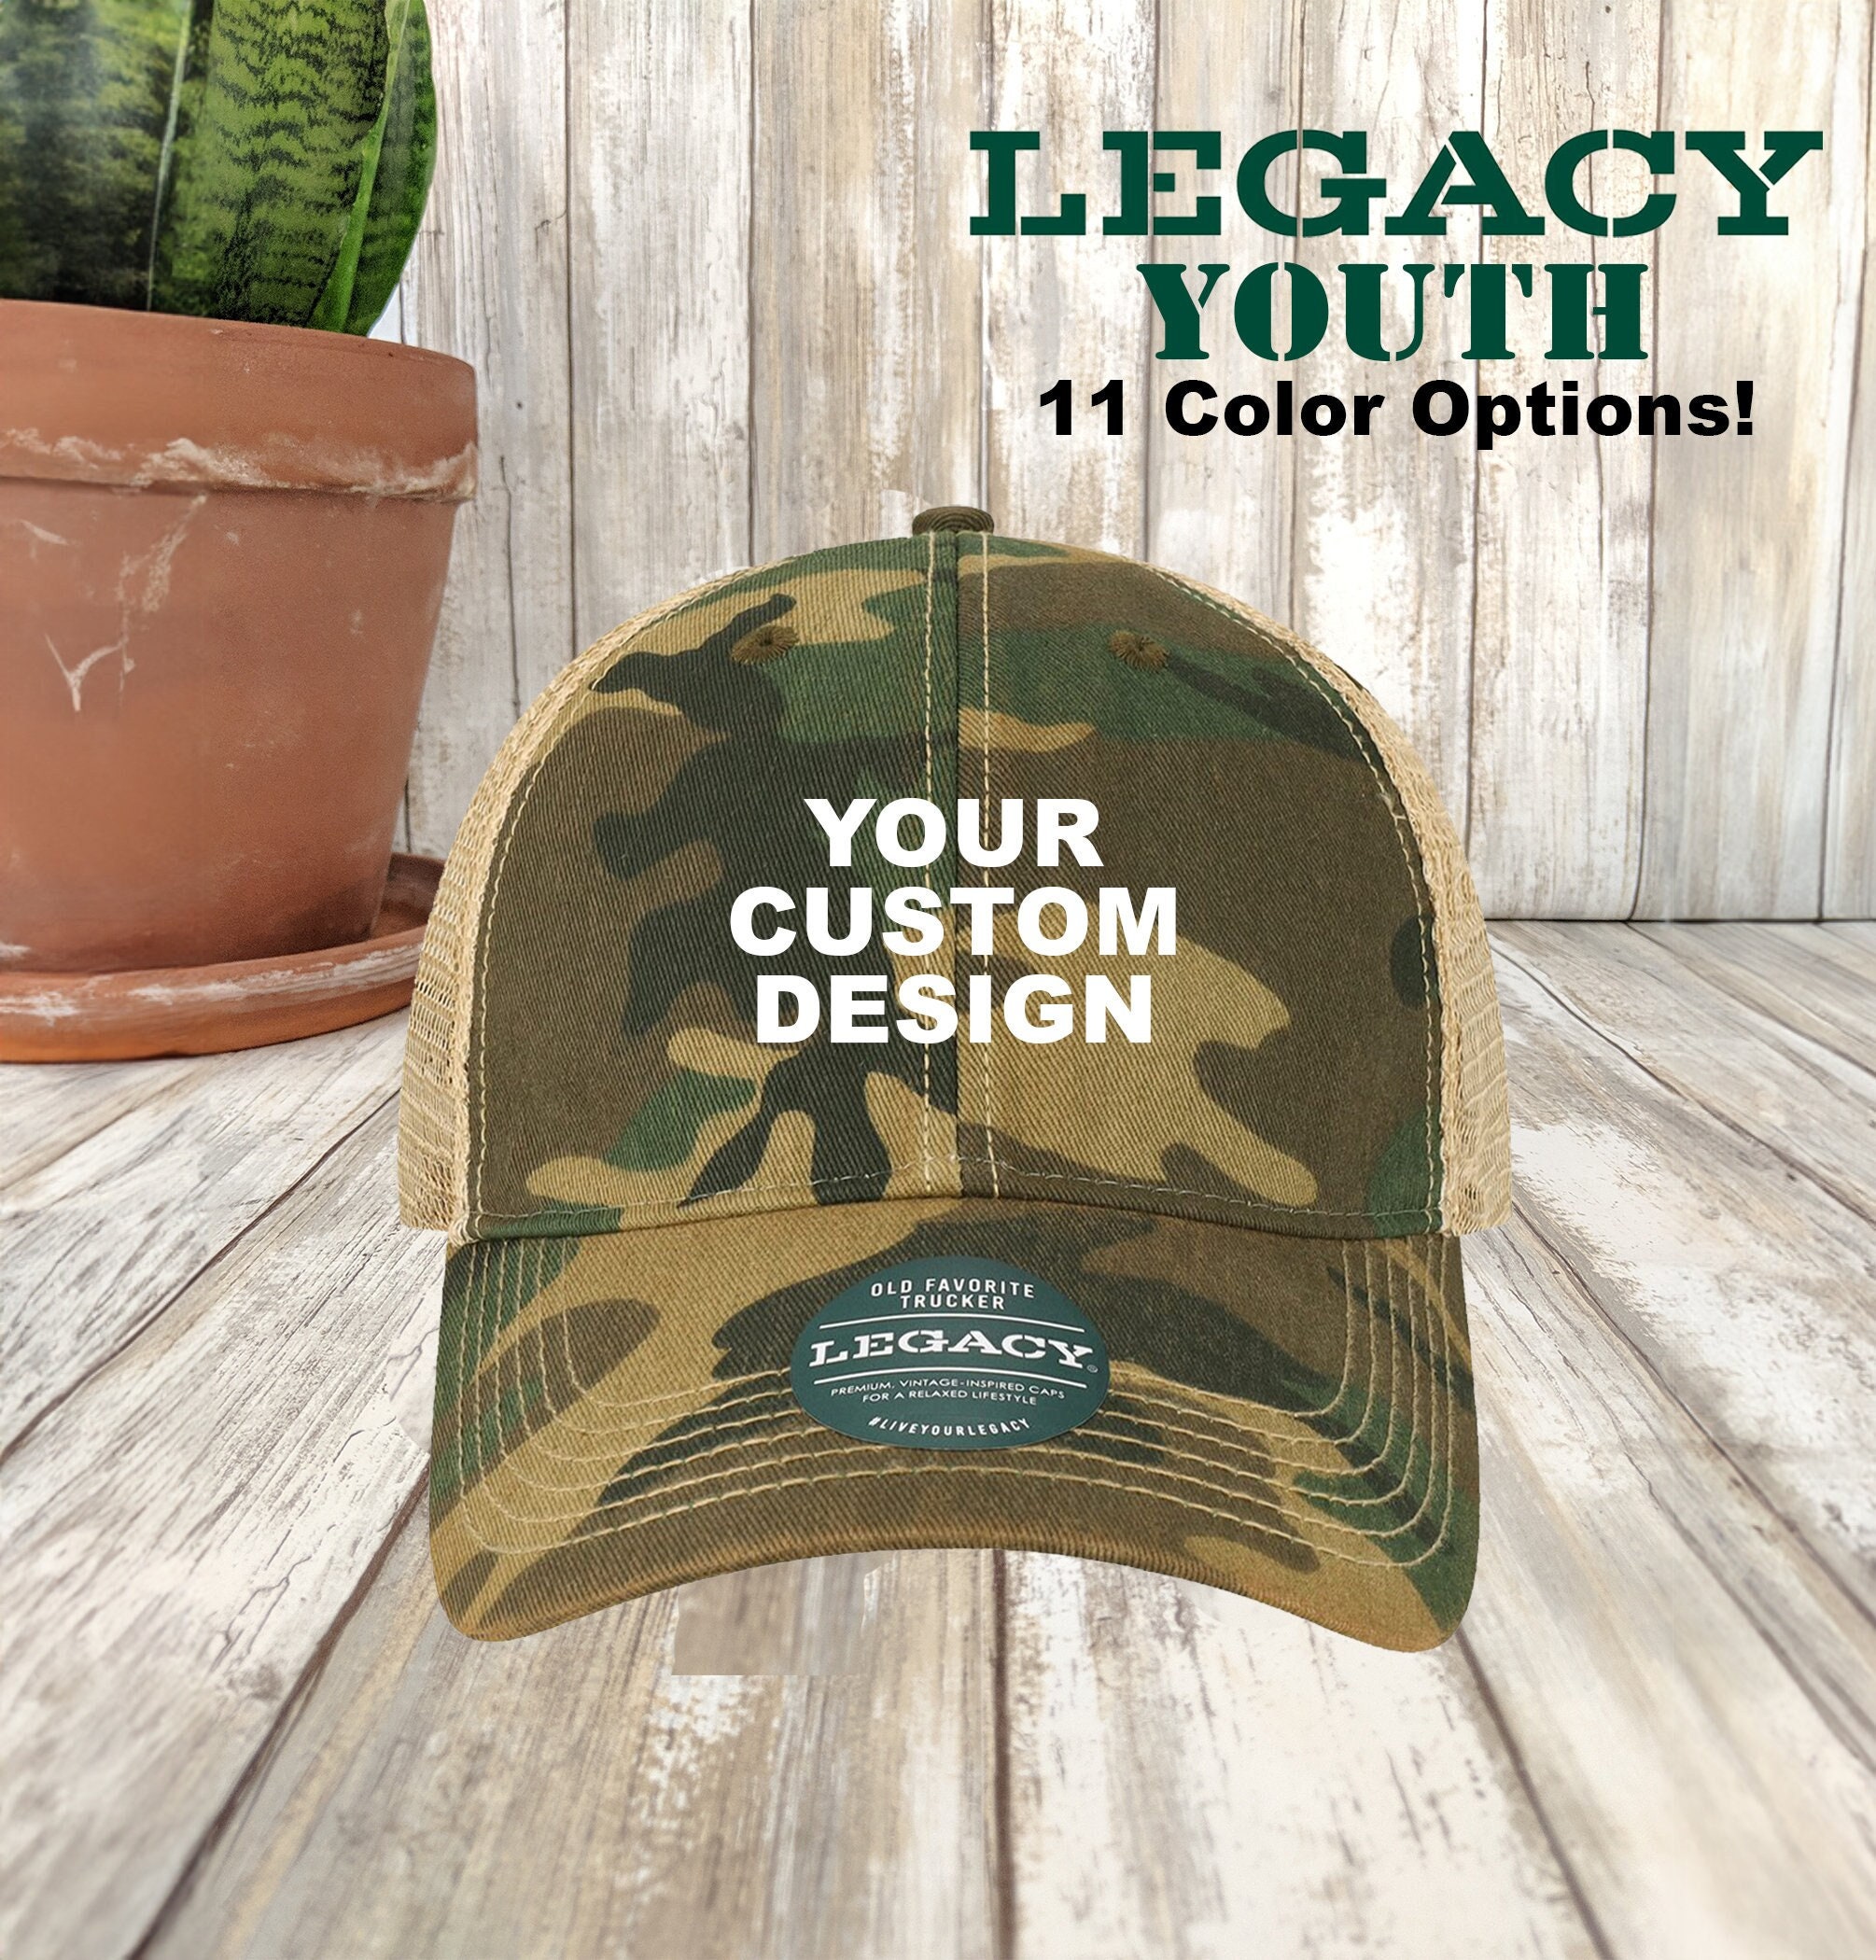 LEGACY Custom Youth Trucker Hat / Old Favorite Trucker / Personalized Mesh  Caps / Unstructured / Embroidered 6 Panel / Youth Size - Etsy